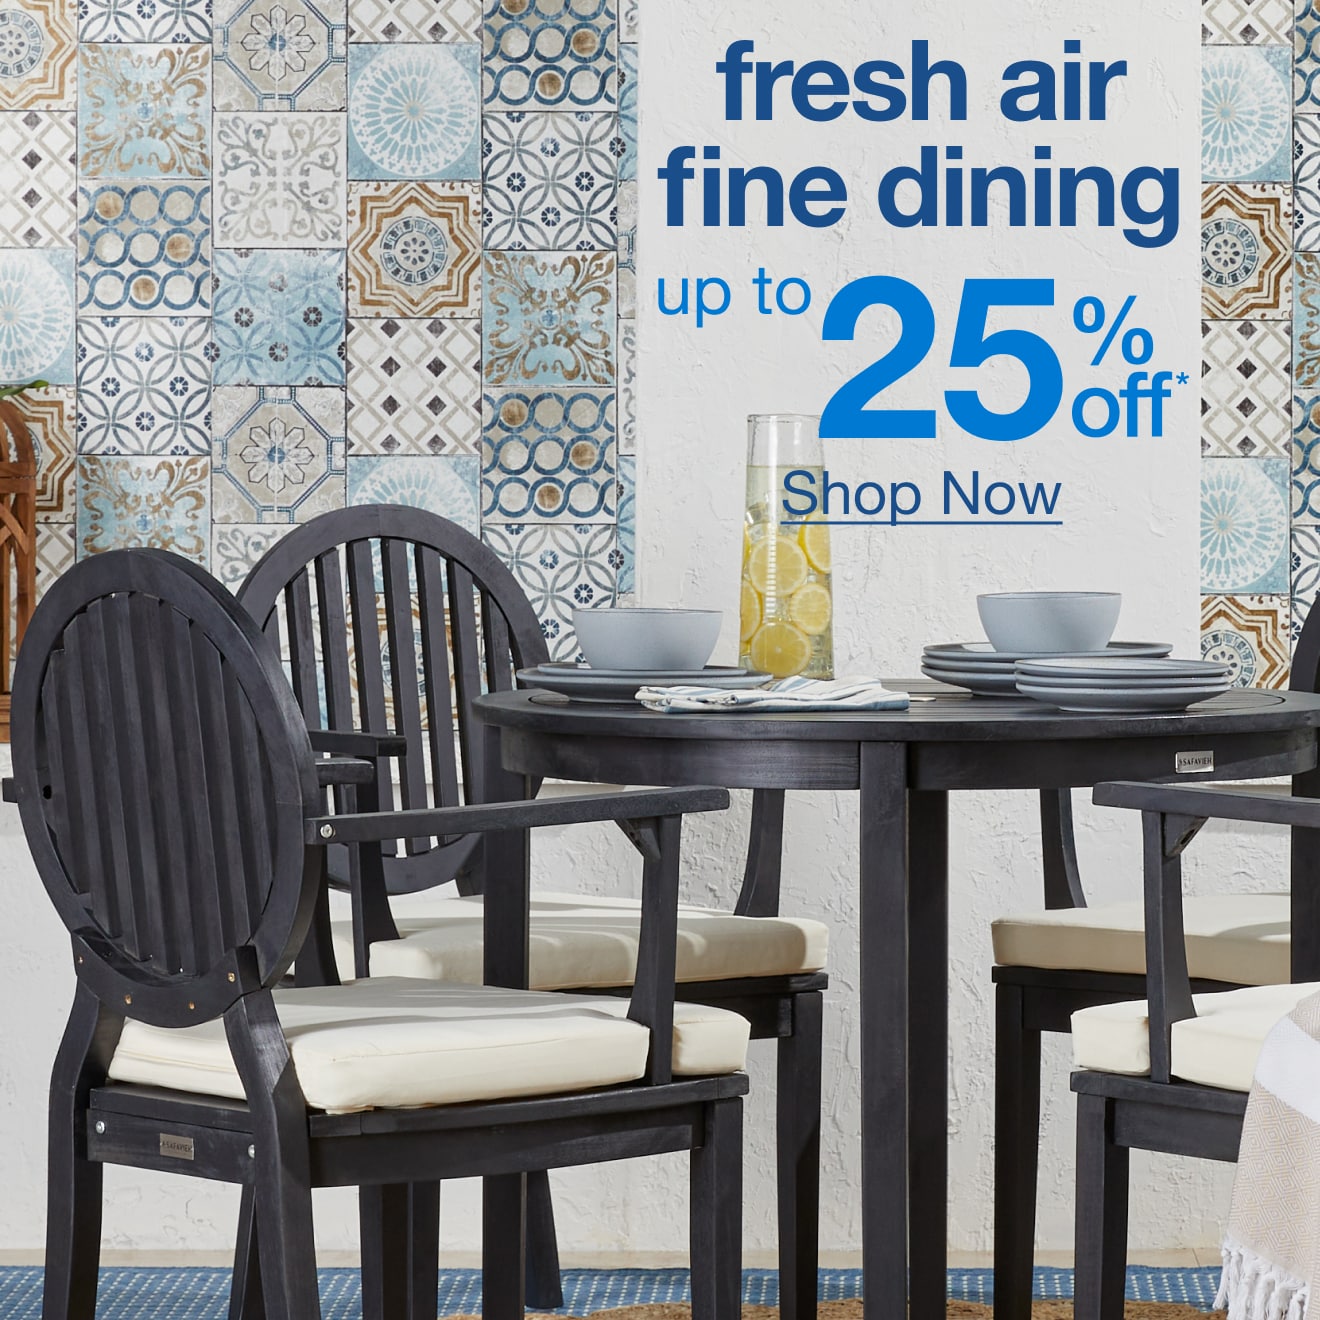 Outdoor Dining Up to 25% Off